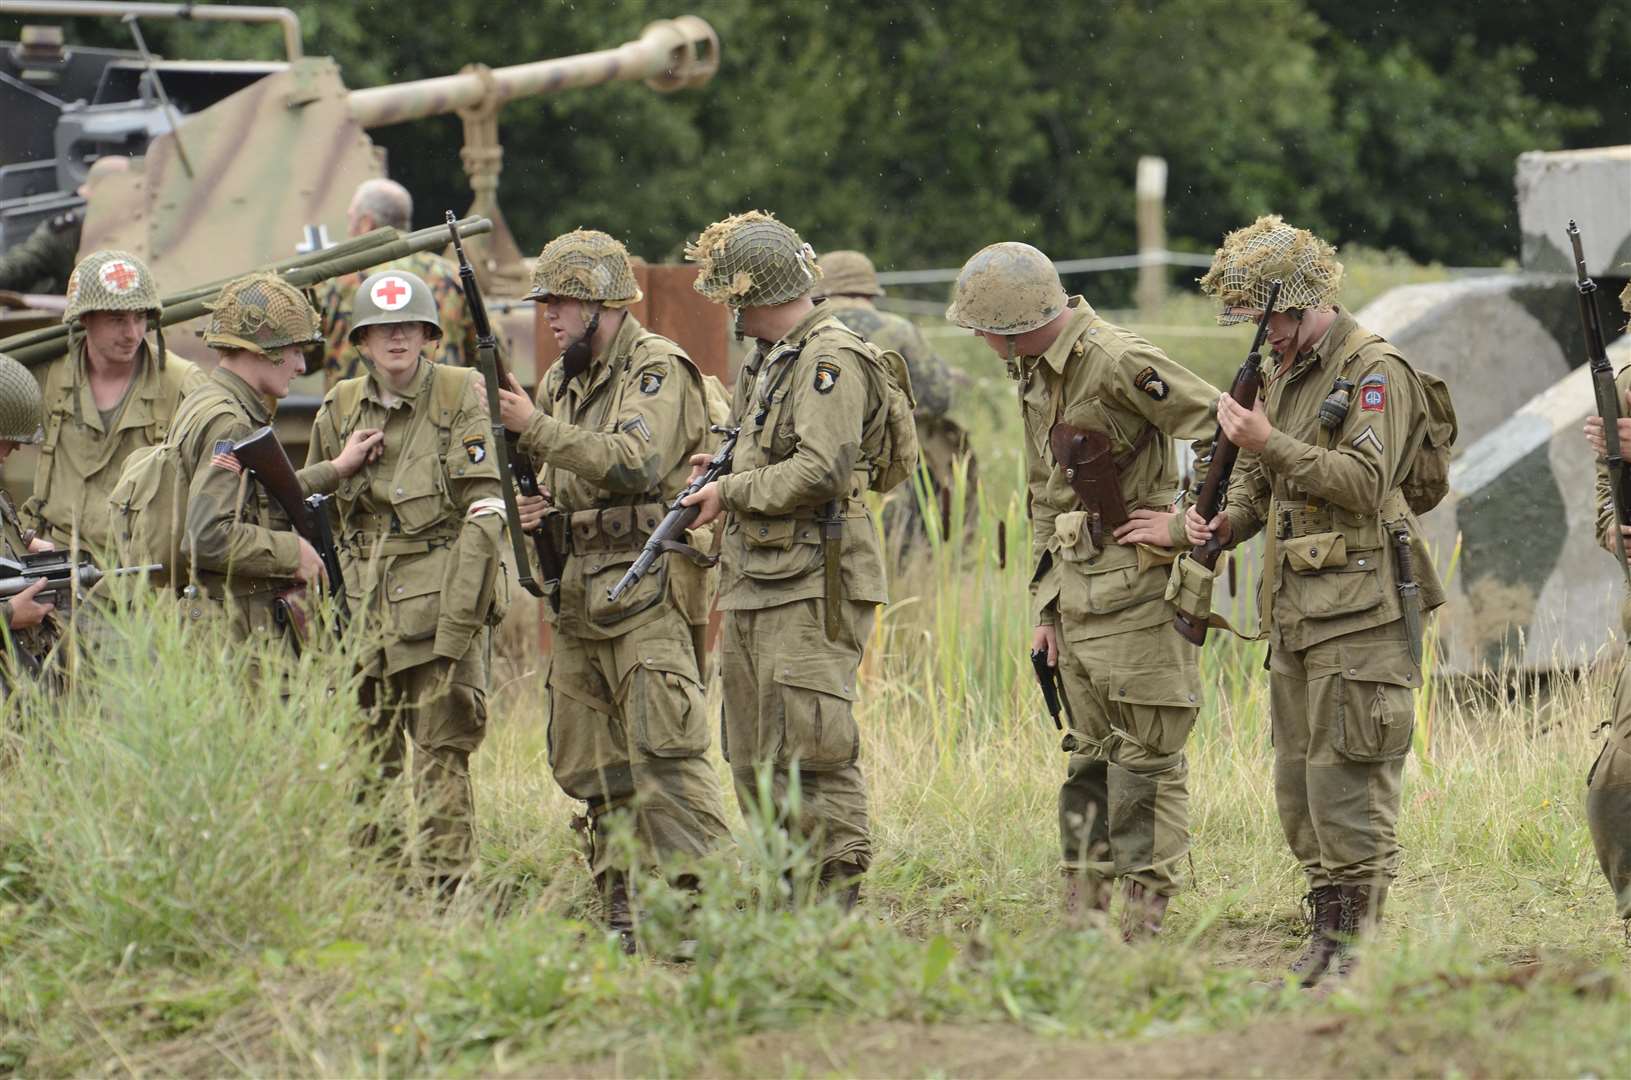 A recreation of an engagement between German and American forces from WWII at the War and Peace show at the Hop Farm, Paddock Wood. Picture: Chris Davey